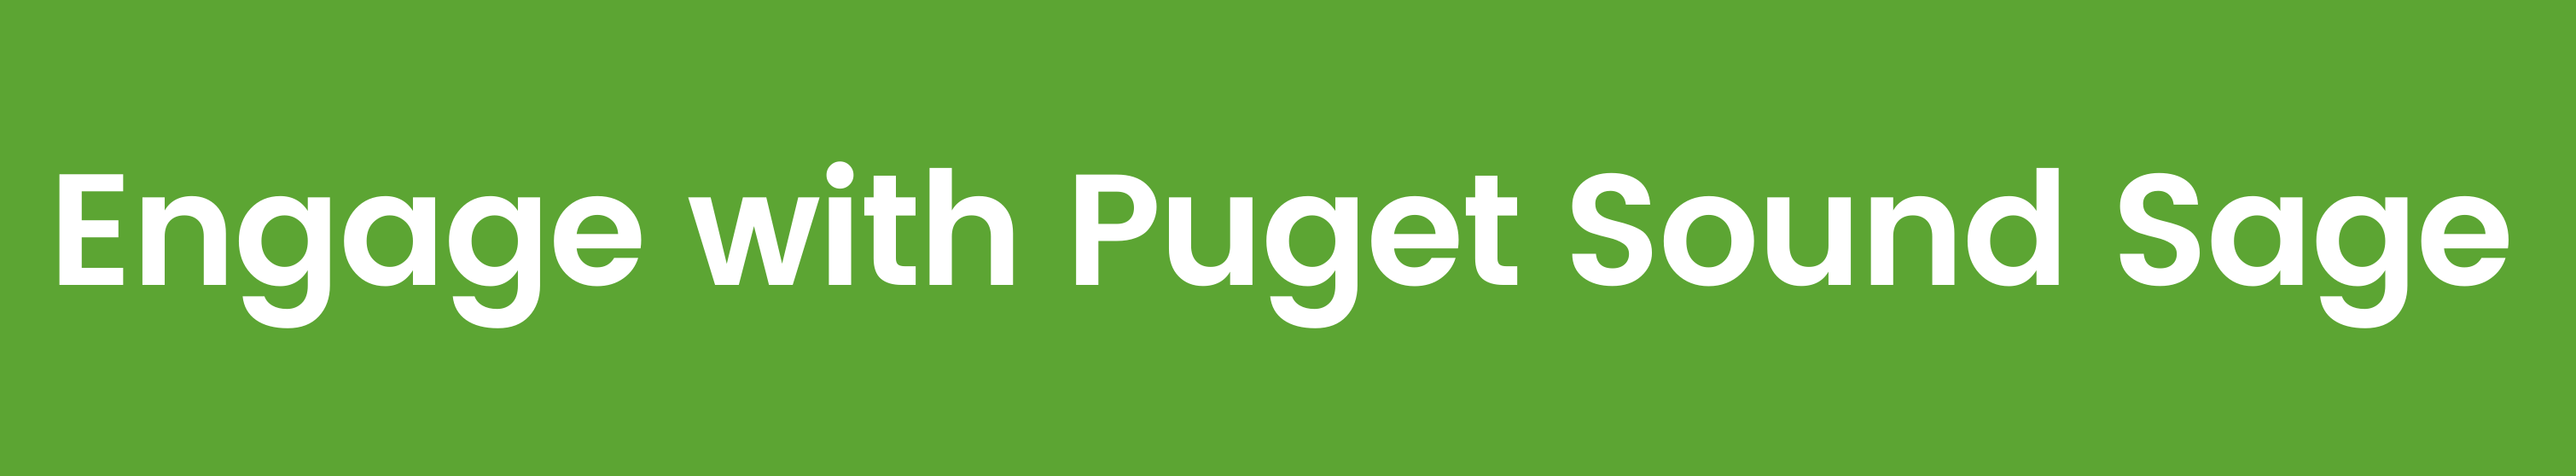 Engage with Puget Sound Sage